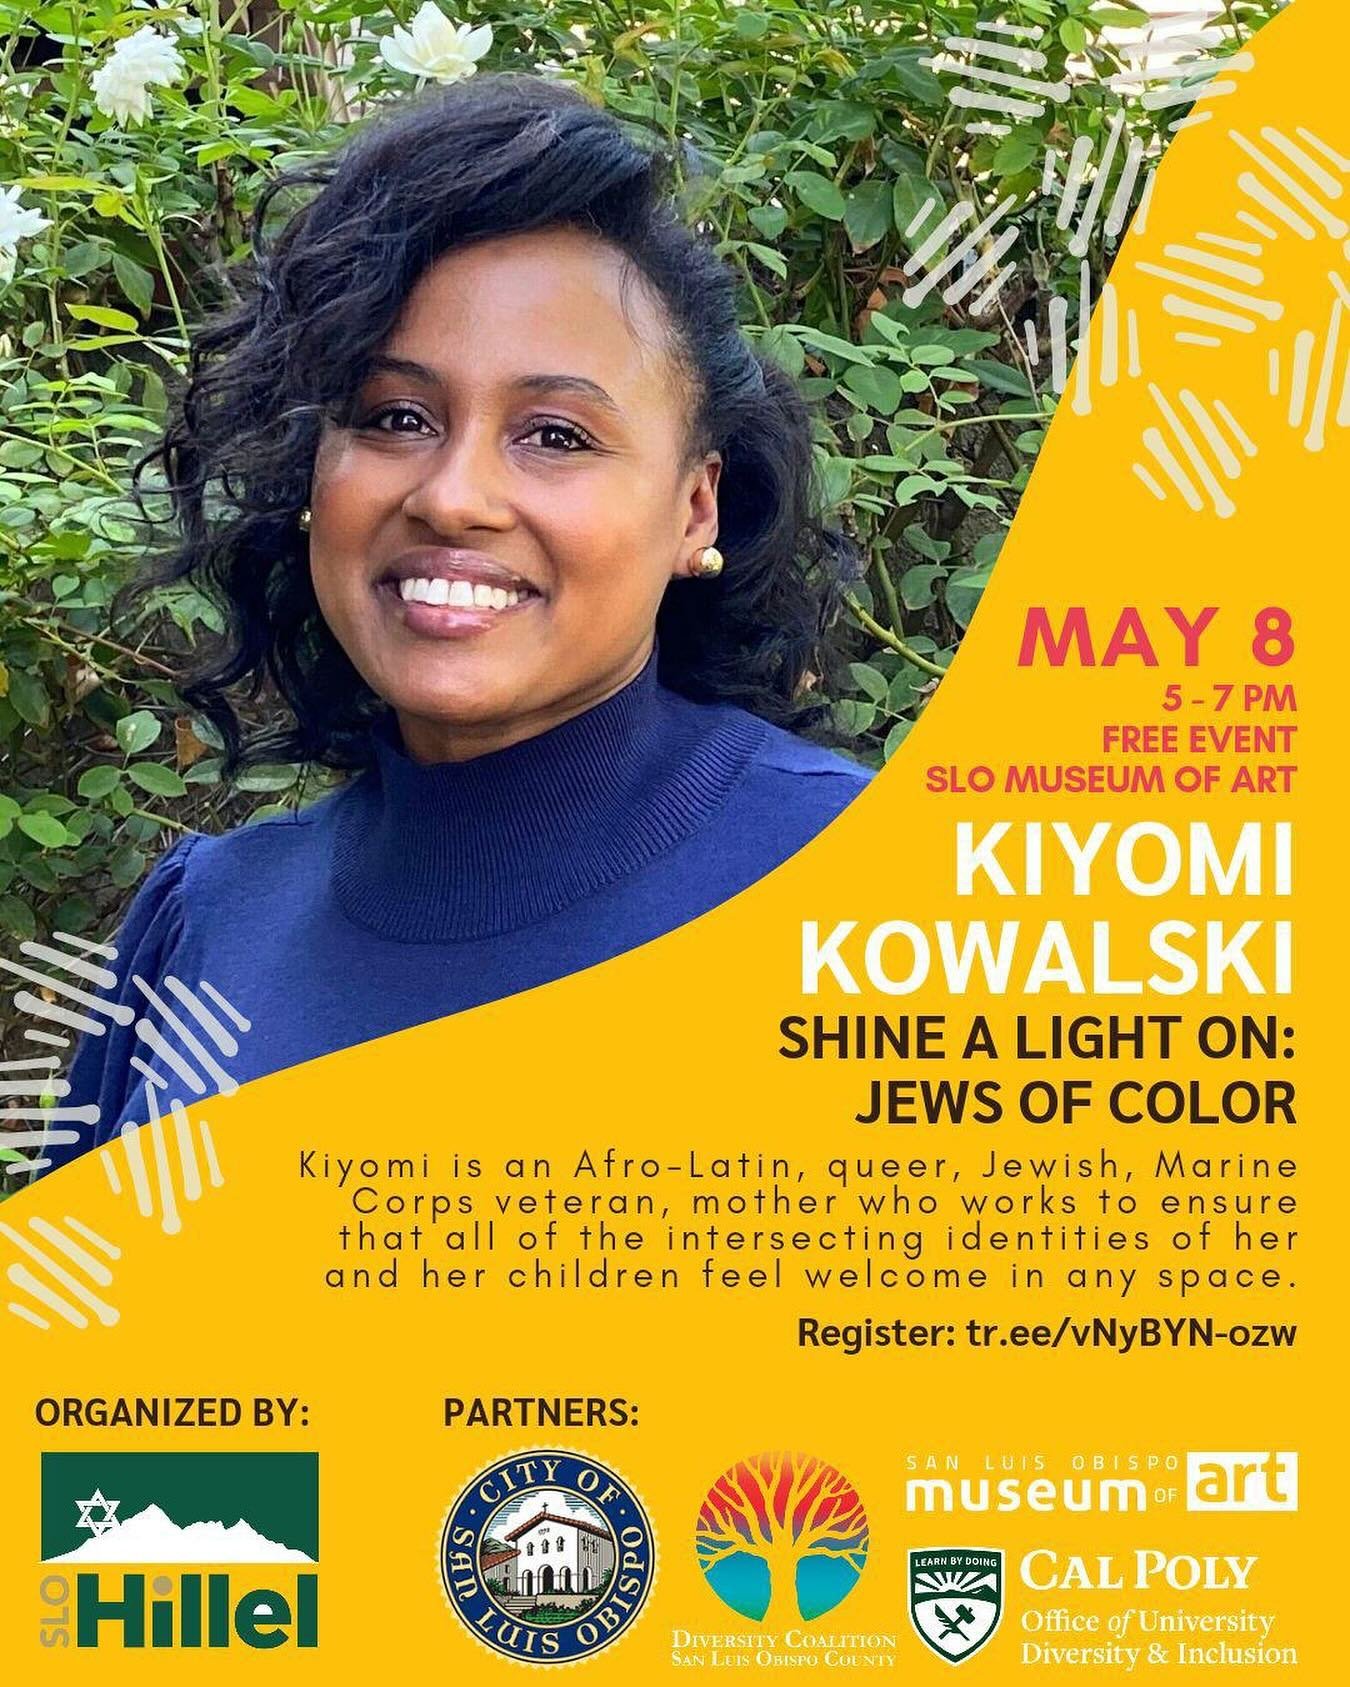 Join us for an event with Kiyomi Kowalski to shine a light on Jews of color on May 8th